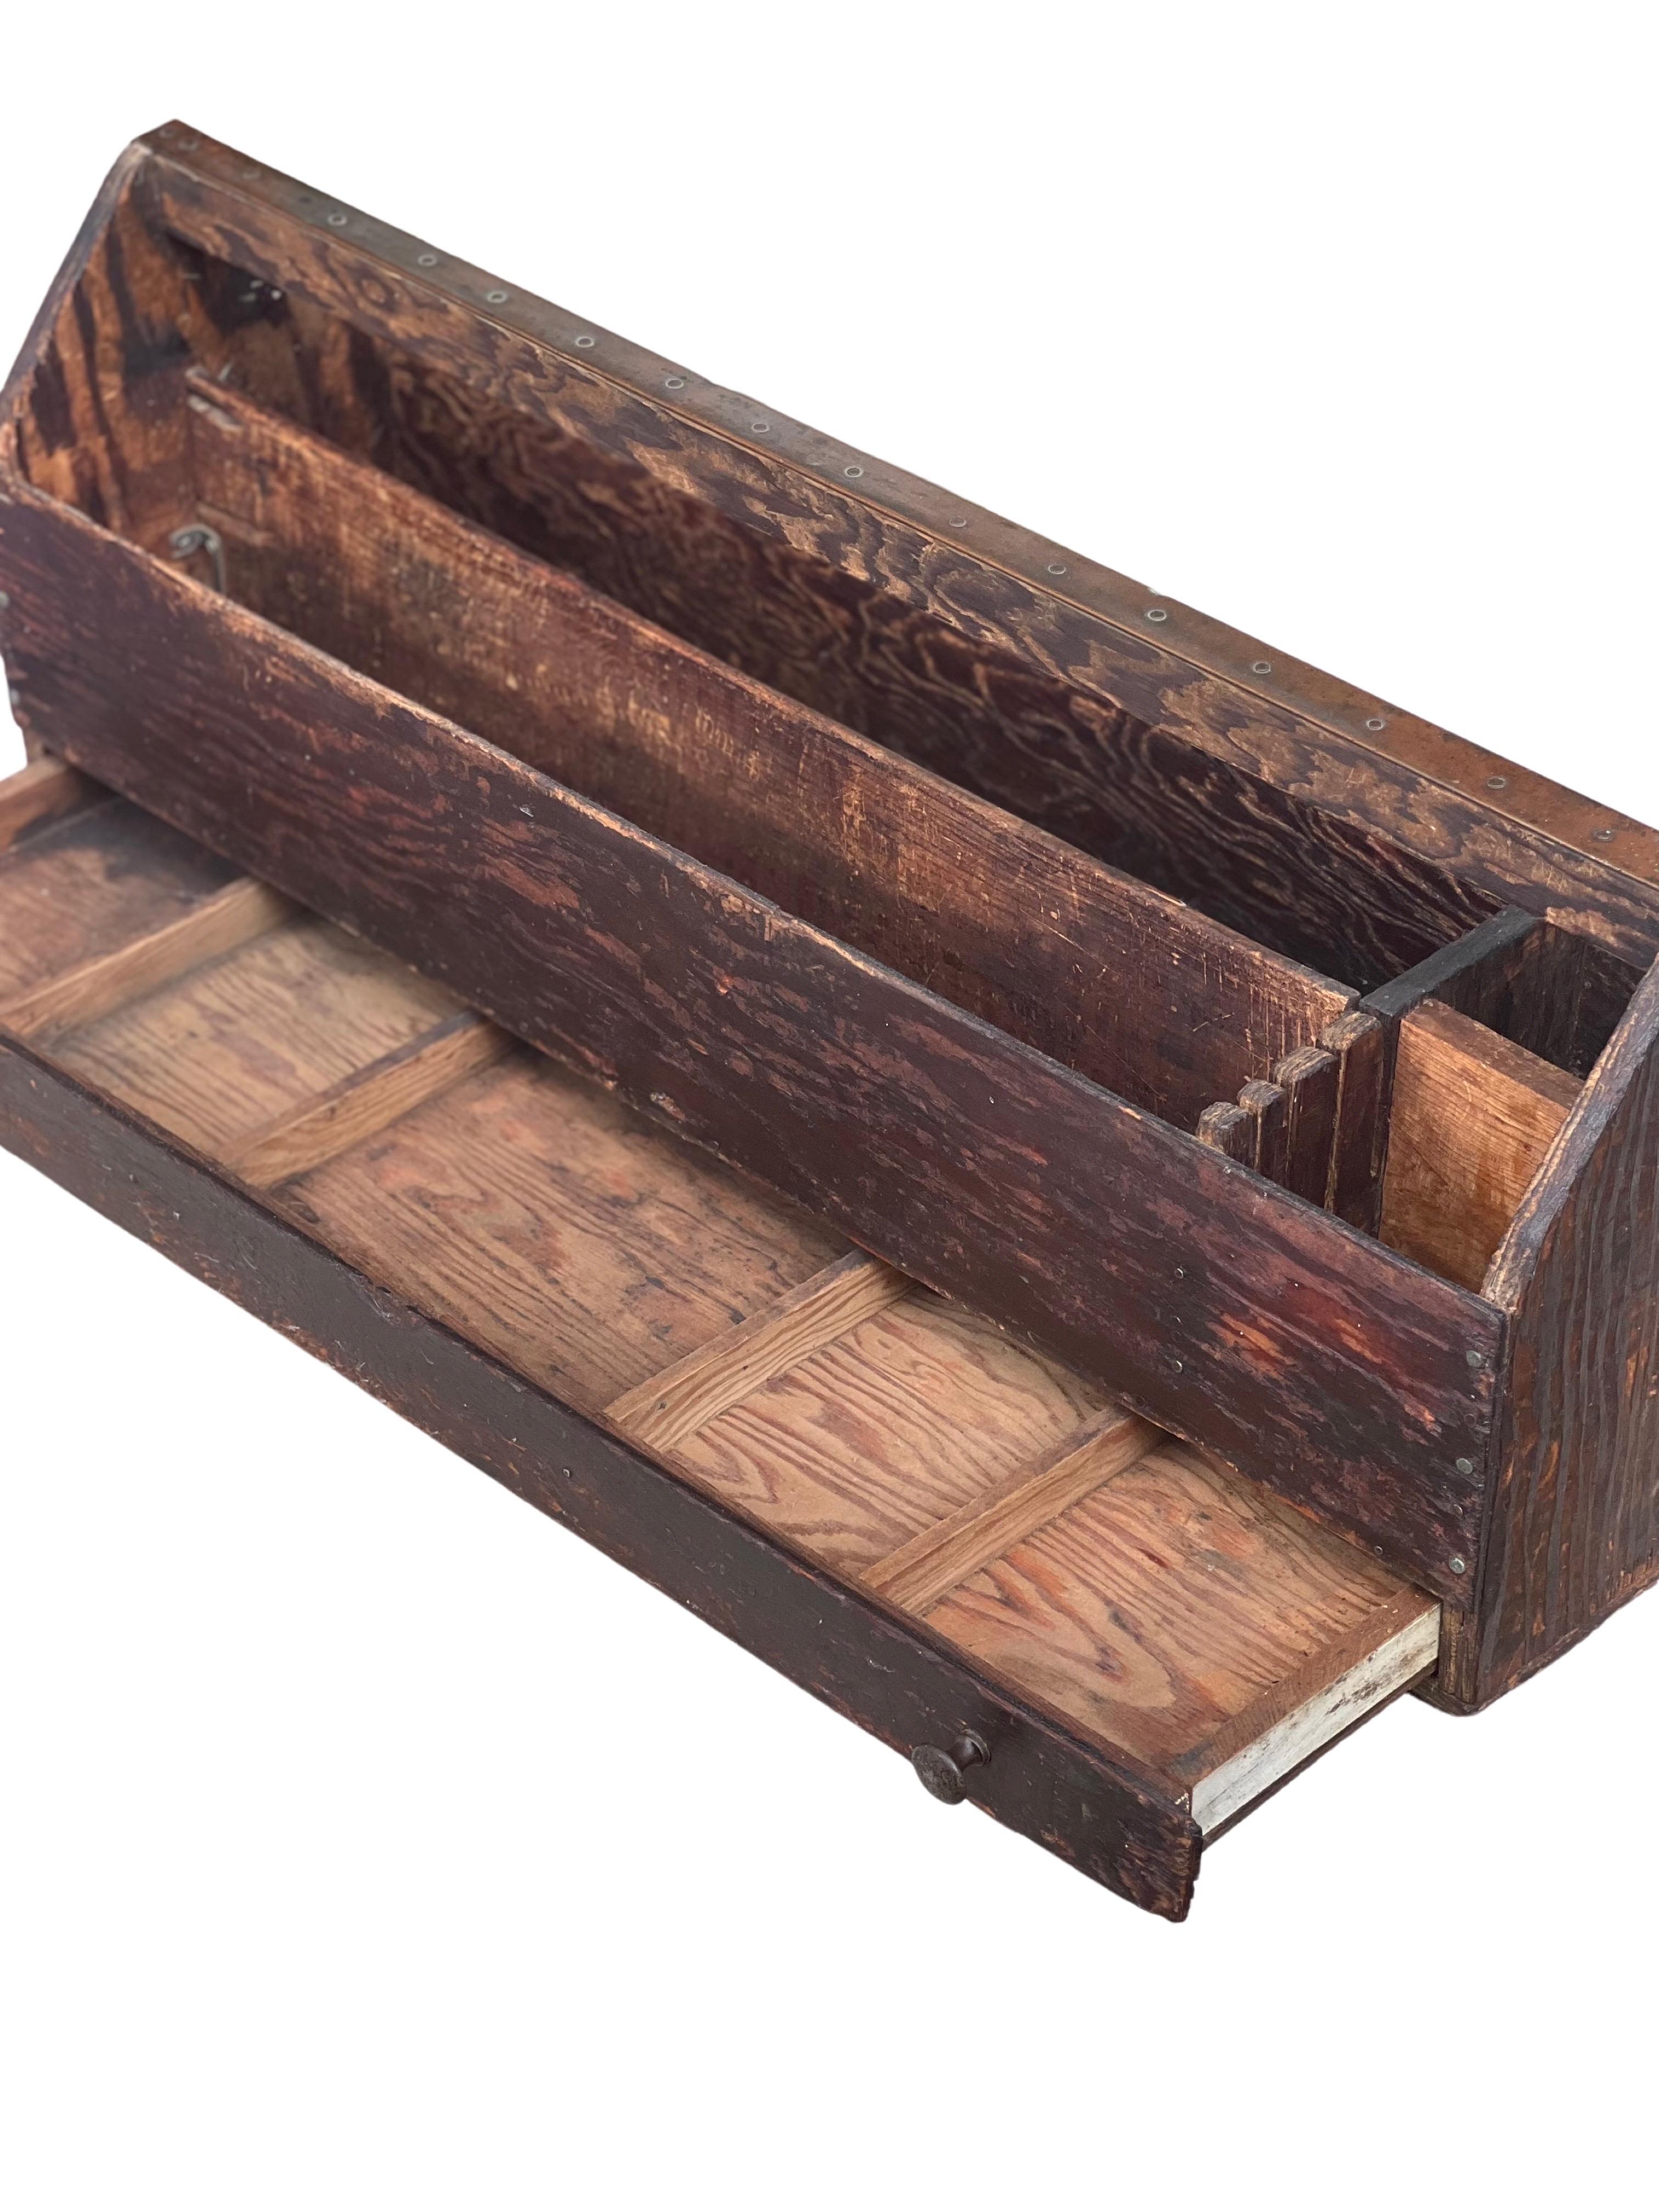 Antique Handcrafted Primitive Pine Tool Carrier or All-Purpose Caddy with Drawer For Sale 1